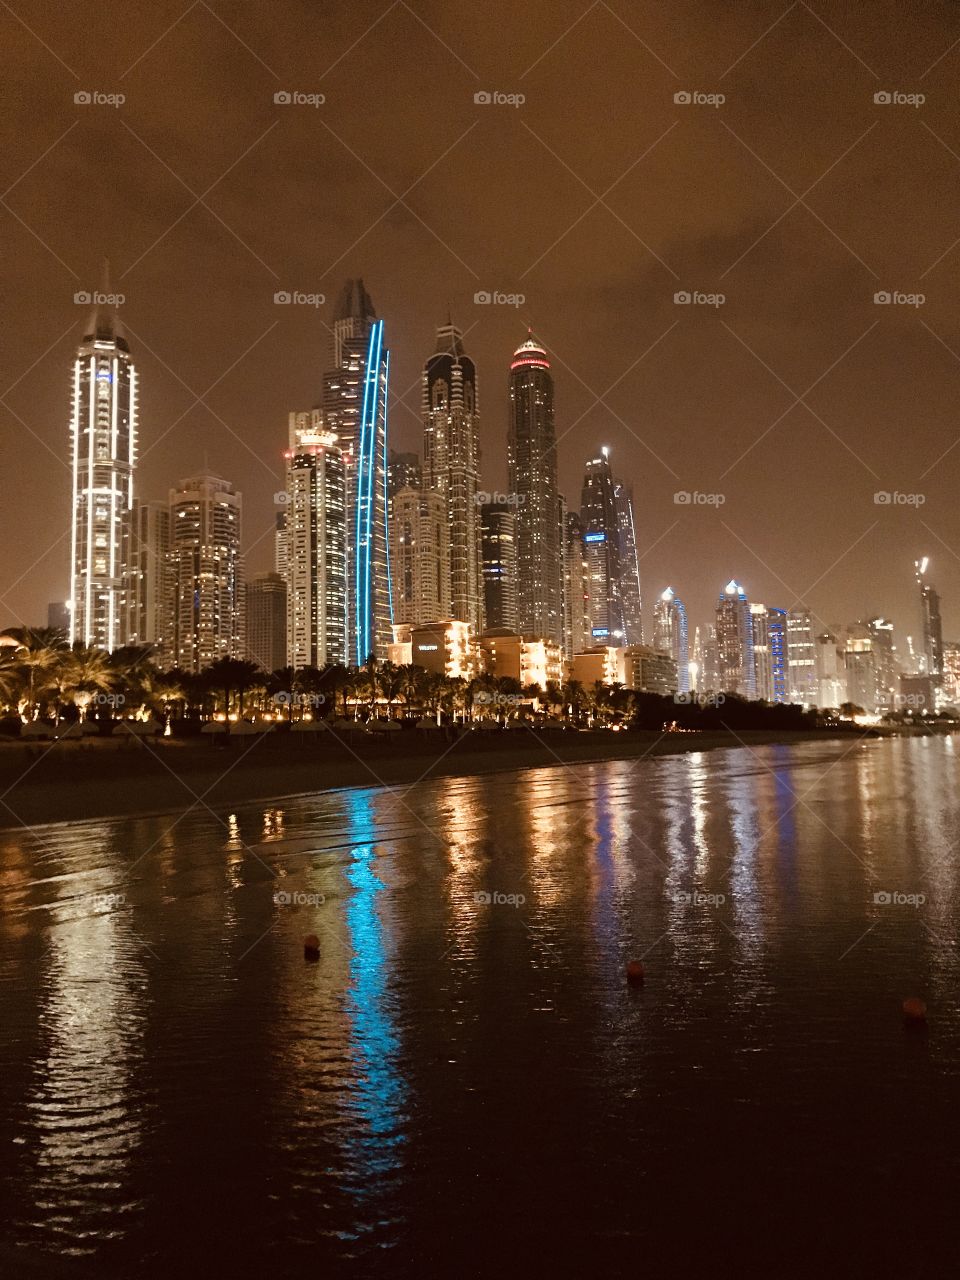 A photo of Dubai skyscrapers from the palm 